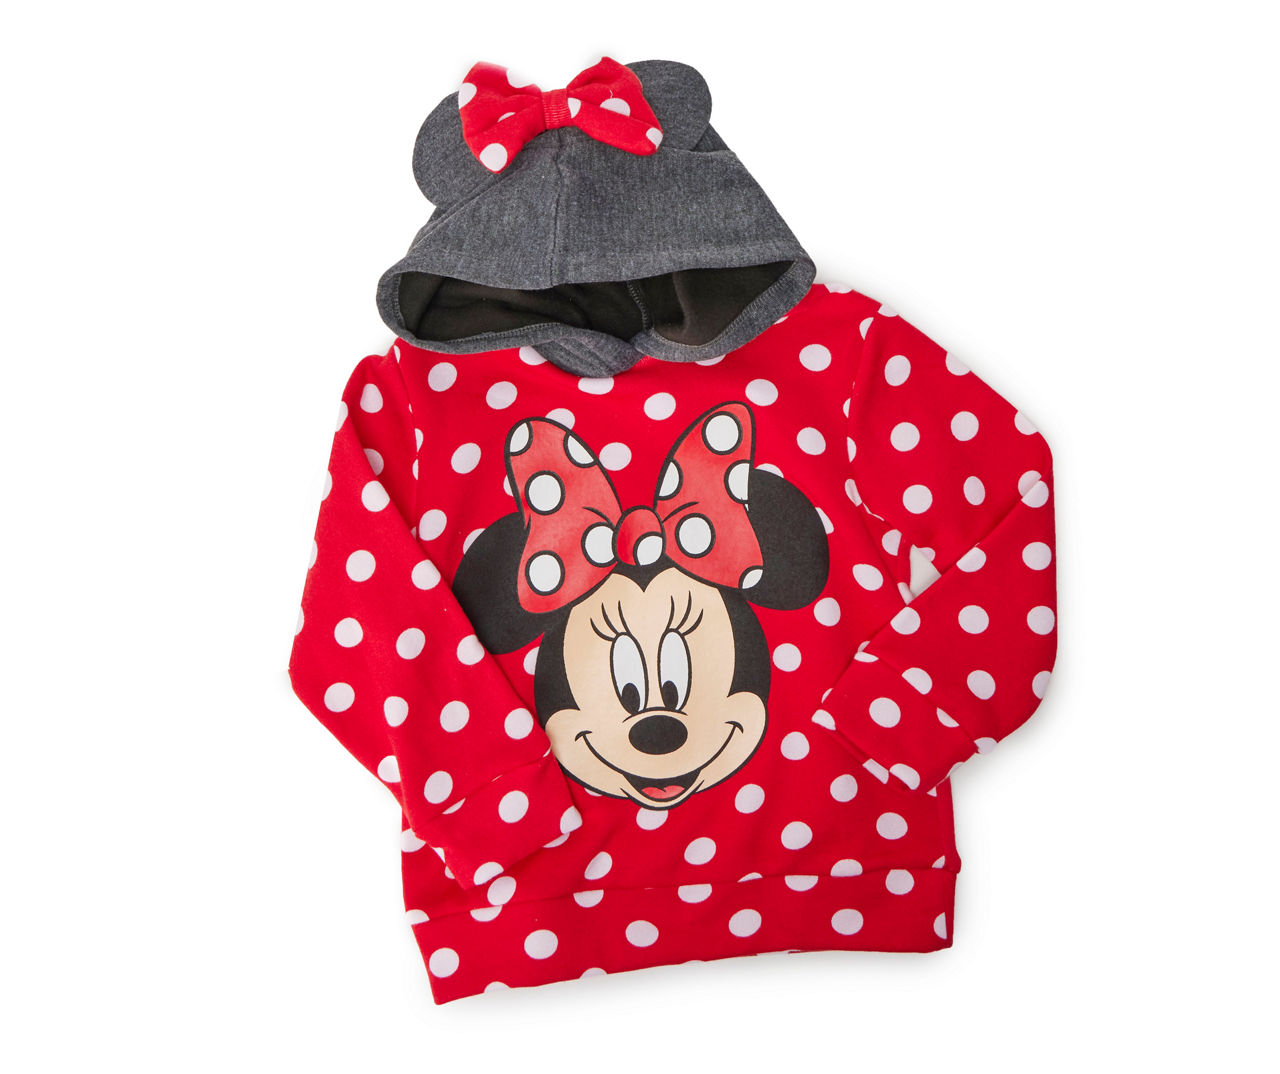 Toddler Size 2T Red & Black Minnie Mouse Cosplay Hoodie